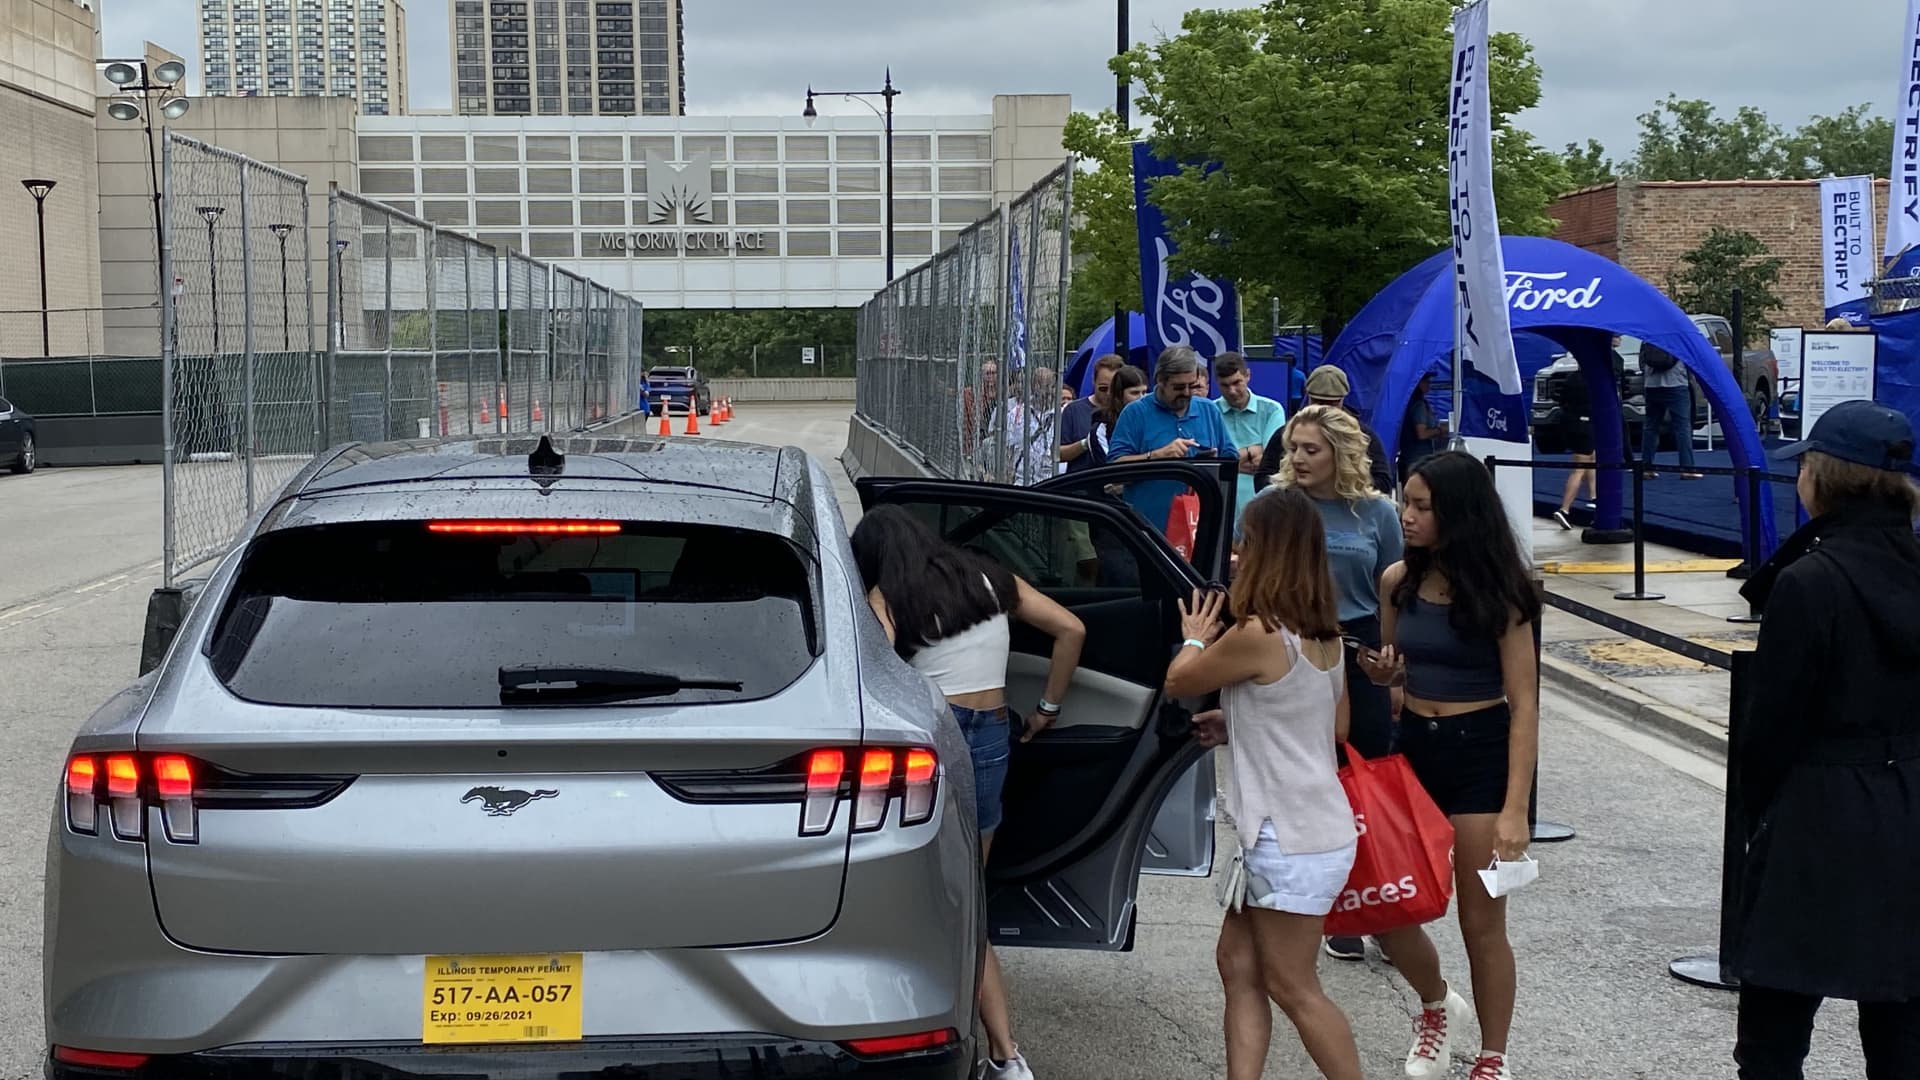 Attendees of the Chicago Auto Show on July 15, 2021 get into a Ford Mustang Mach-E for a test ride in the electric crossover outside of the McCormick Place Convention Center.